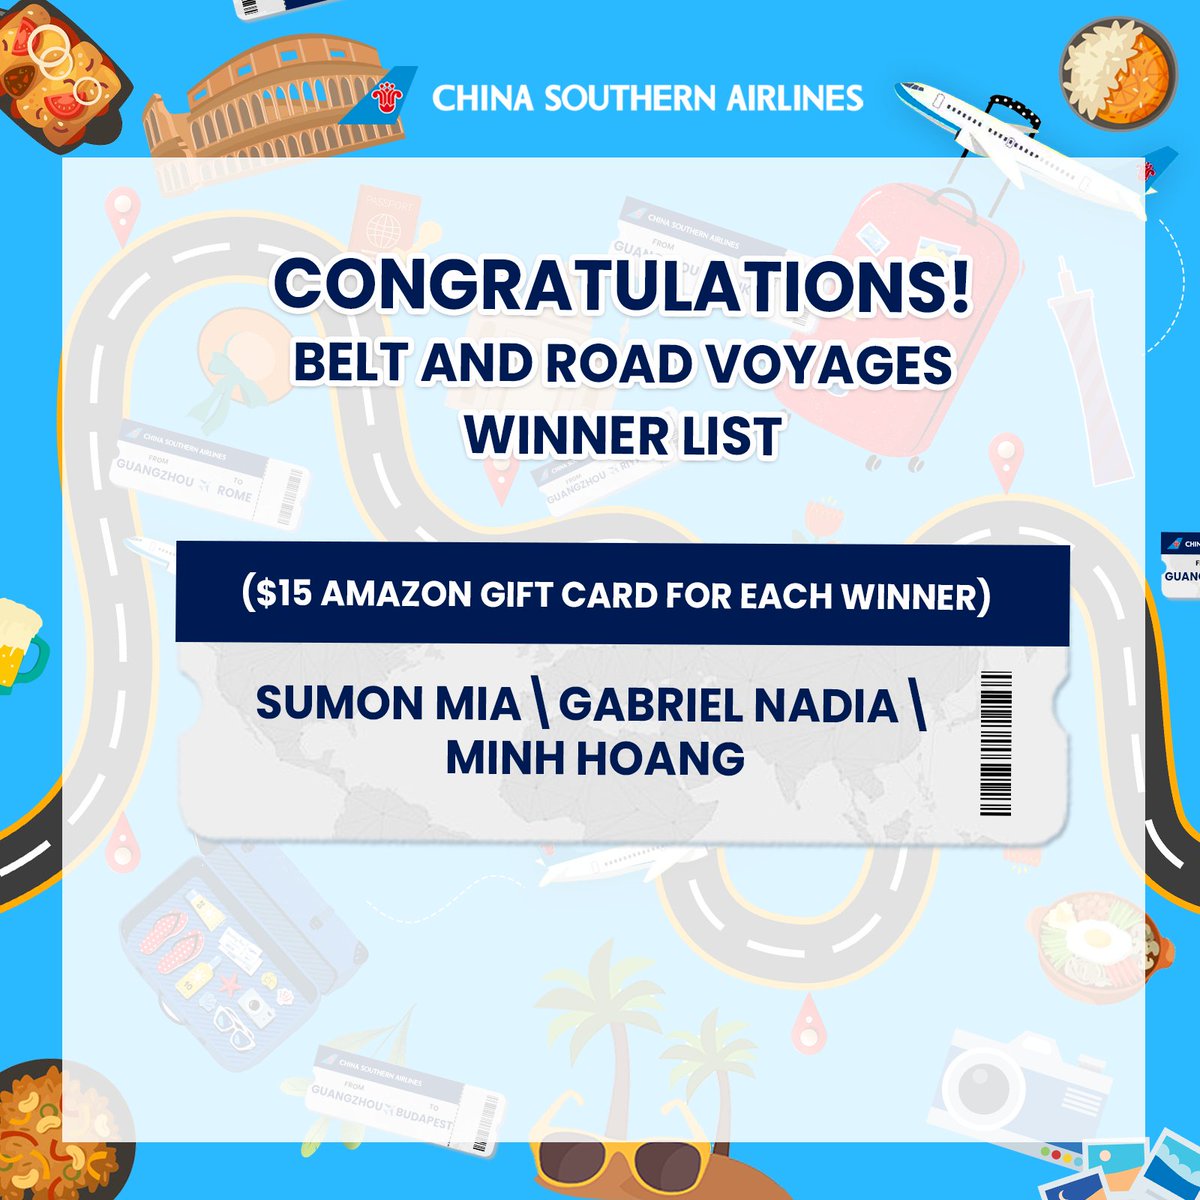 🎉 Congratulations to all the winners in the event #BeltandRoadVoyages! Please send a confirmation email to gsme@csair.com with the screenshot of your winning comment and your Sky Pearl Club number to claim your reward! #CSAir #FlyWithCSAir